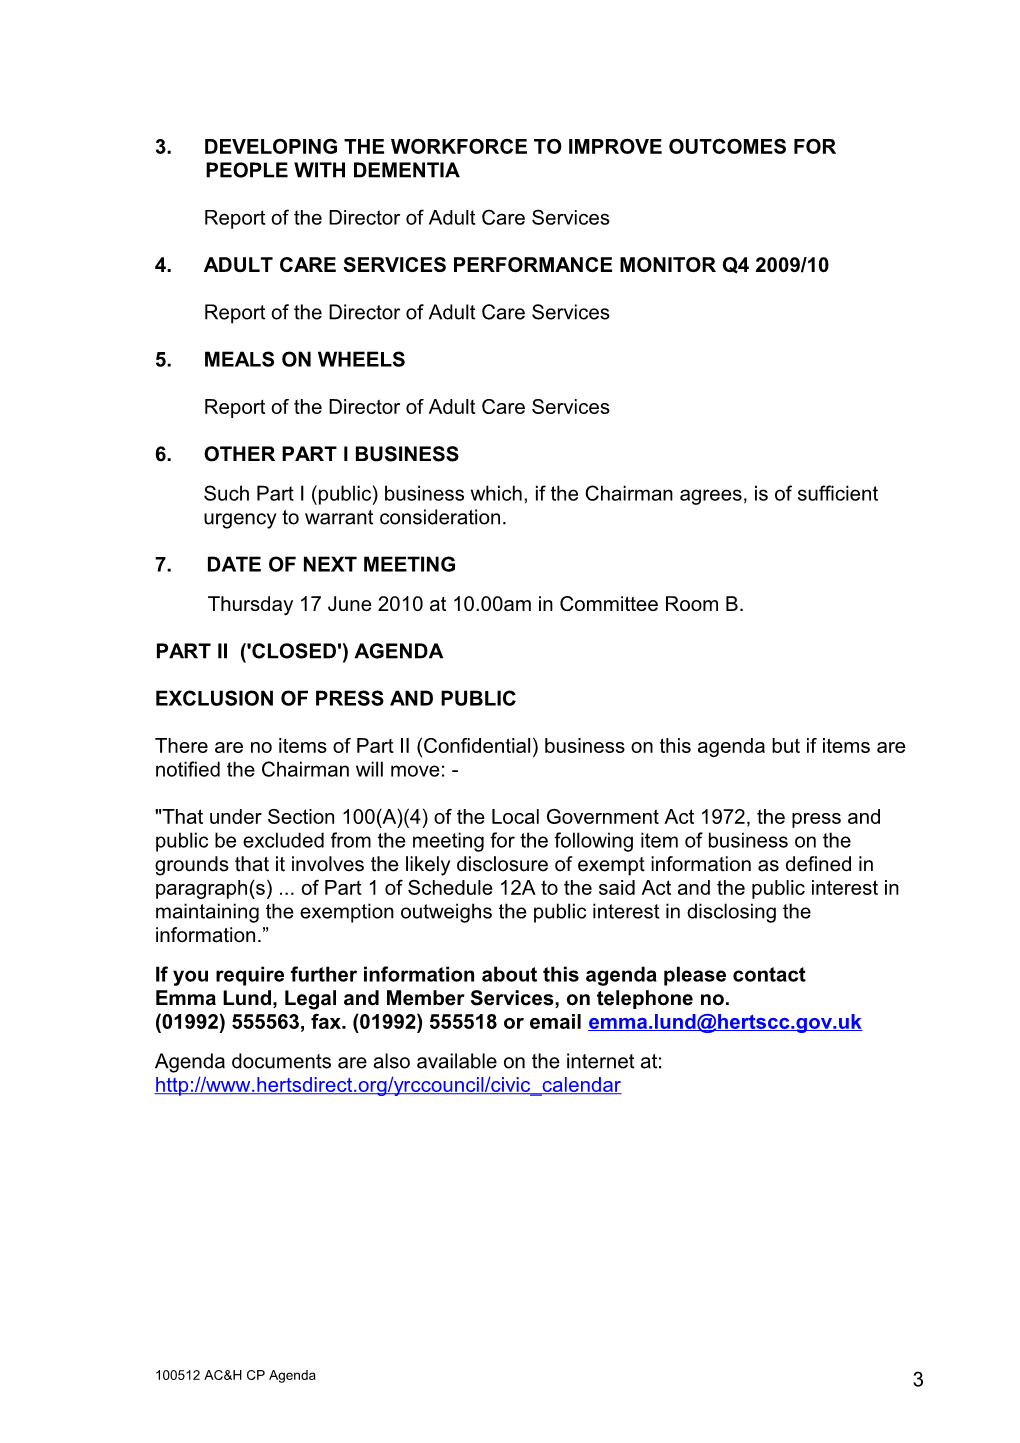 Agenda for a Meeting of the Adult Care and Health Cabinet Panel Wednesday 12 May 2010 at 10.00Am